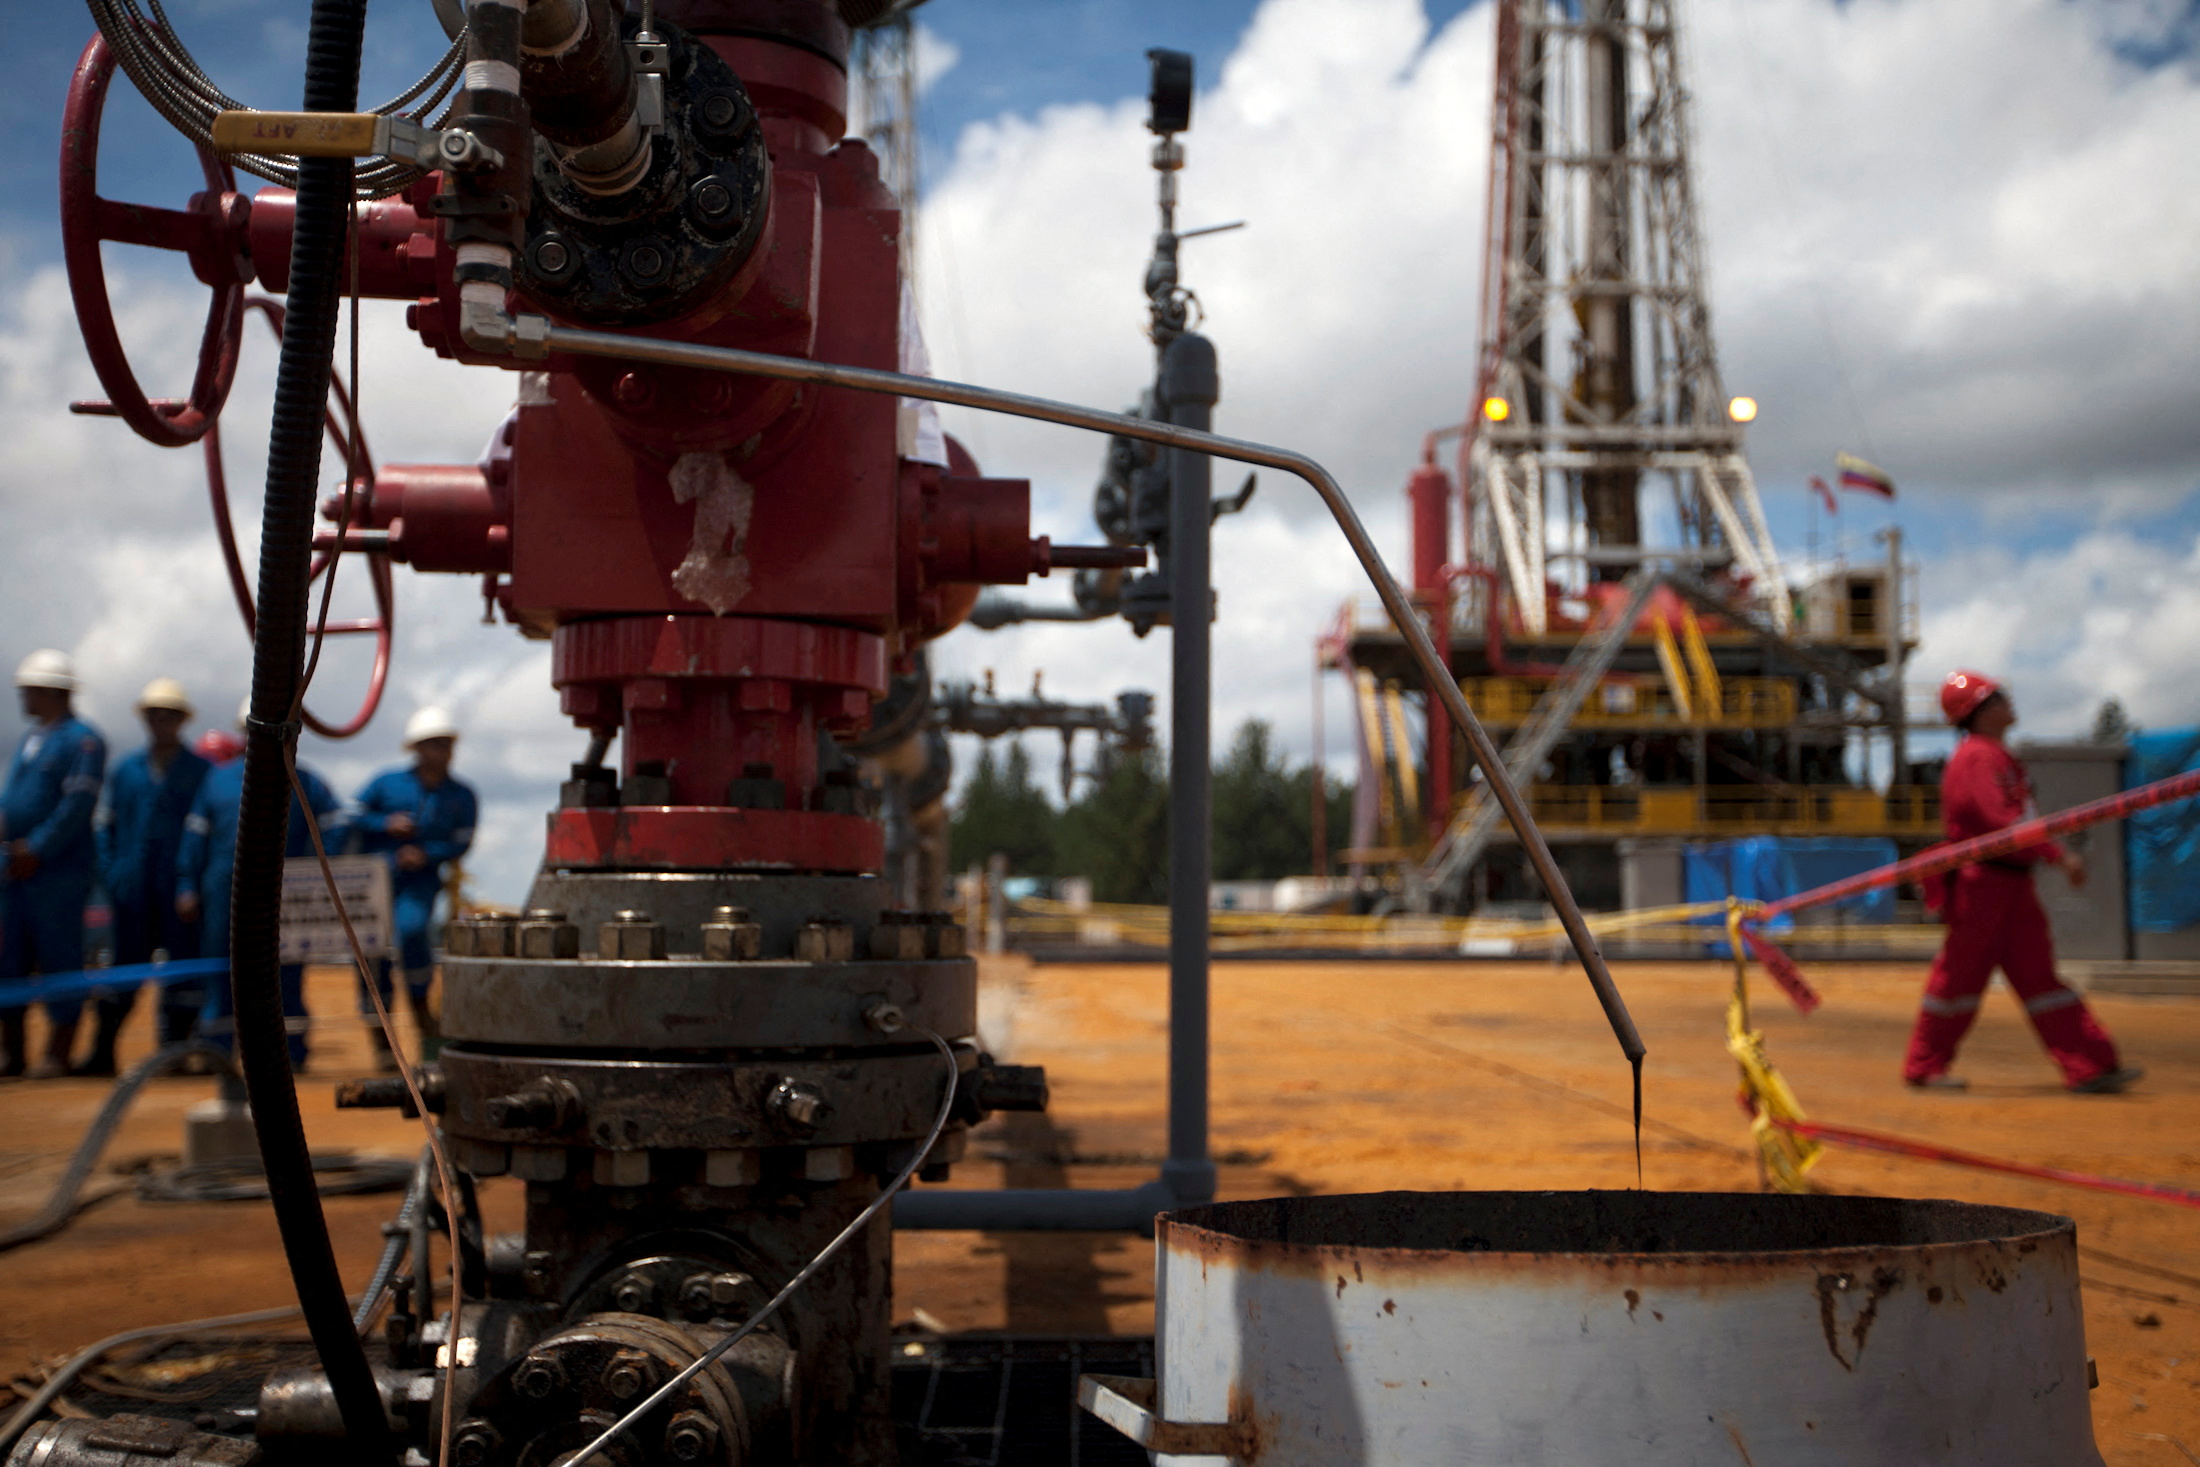 Crude oil drips from a valve at an oil well operated by Venezuela's state oil company PDVSA in Morichal